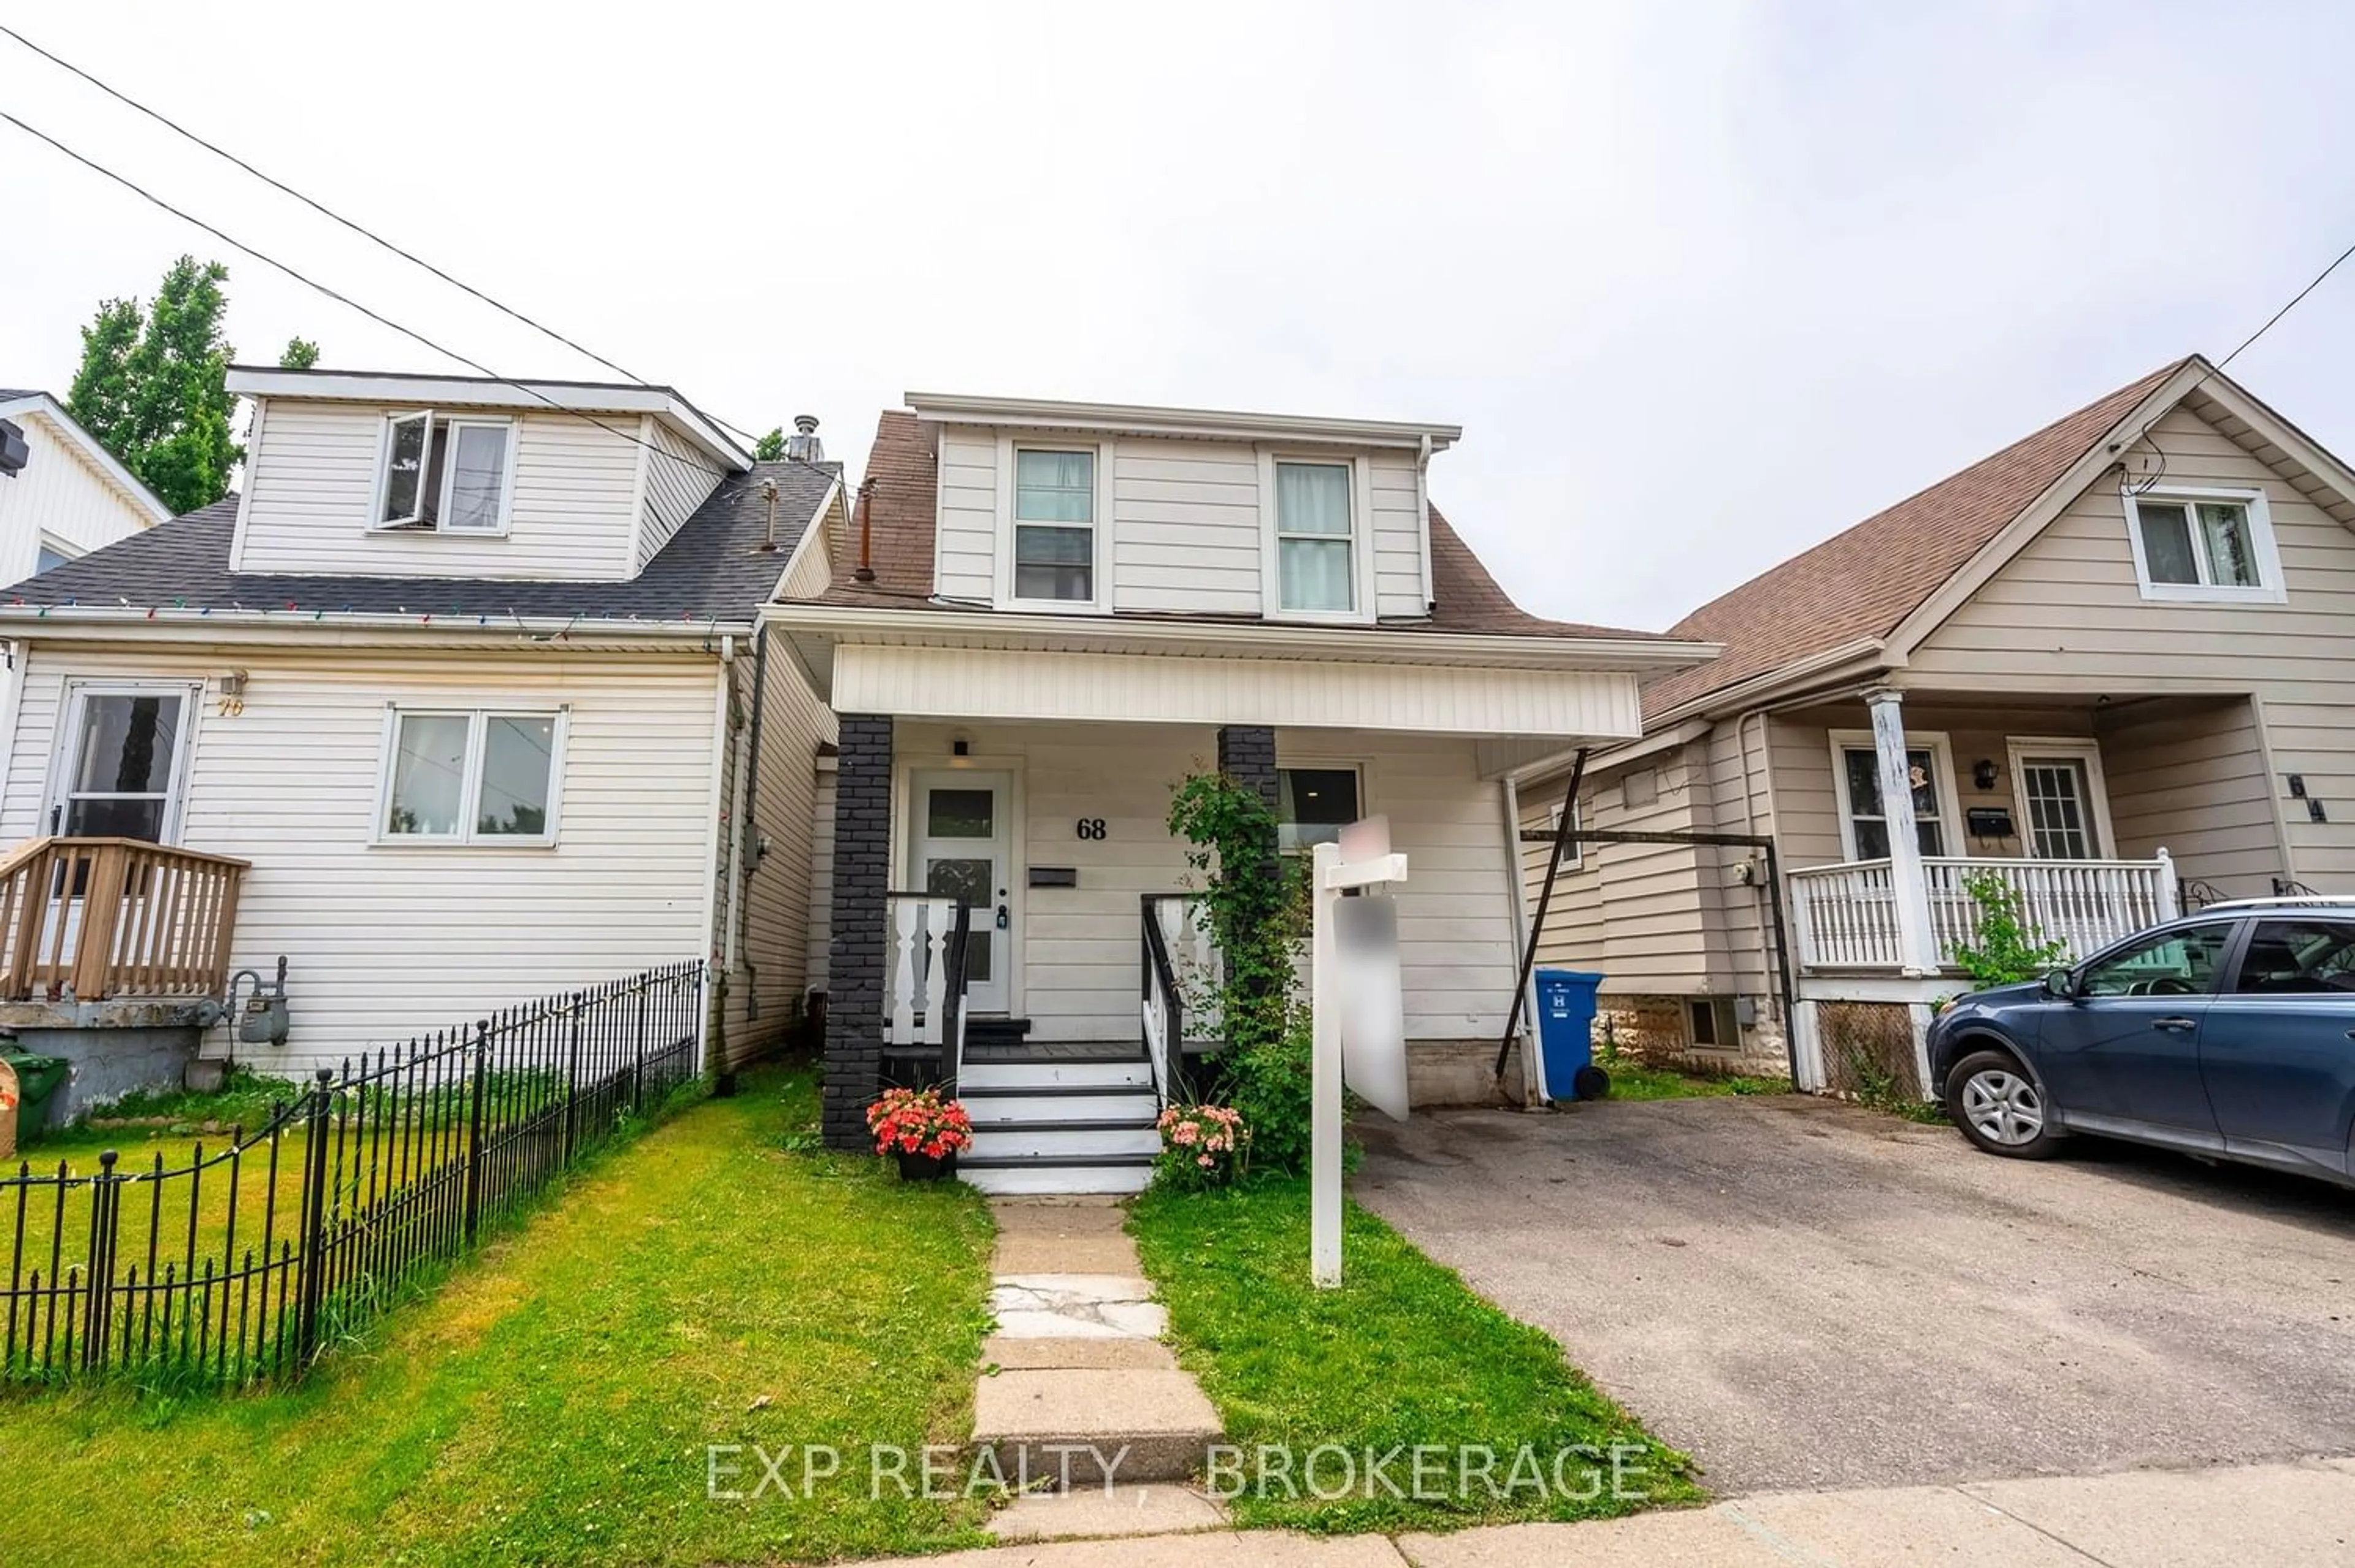 Frontside or backside of a home for 68 HARRISON Ave, Hamilton Ontario L8H 3A1